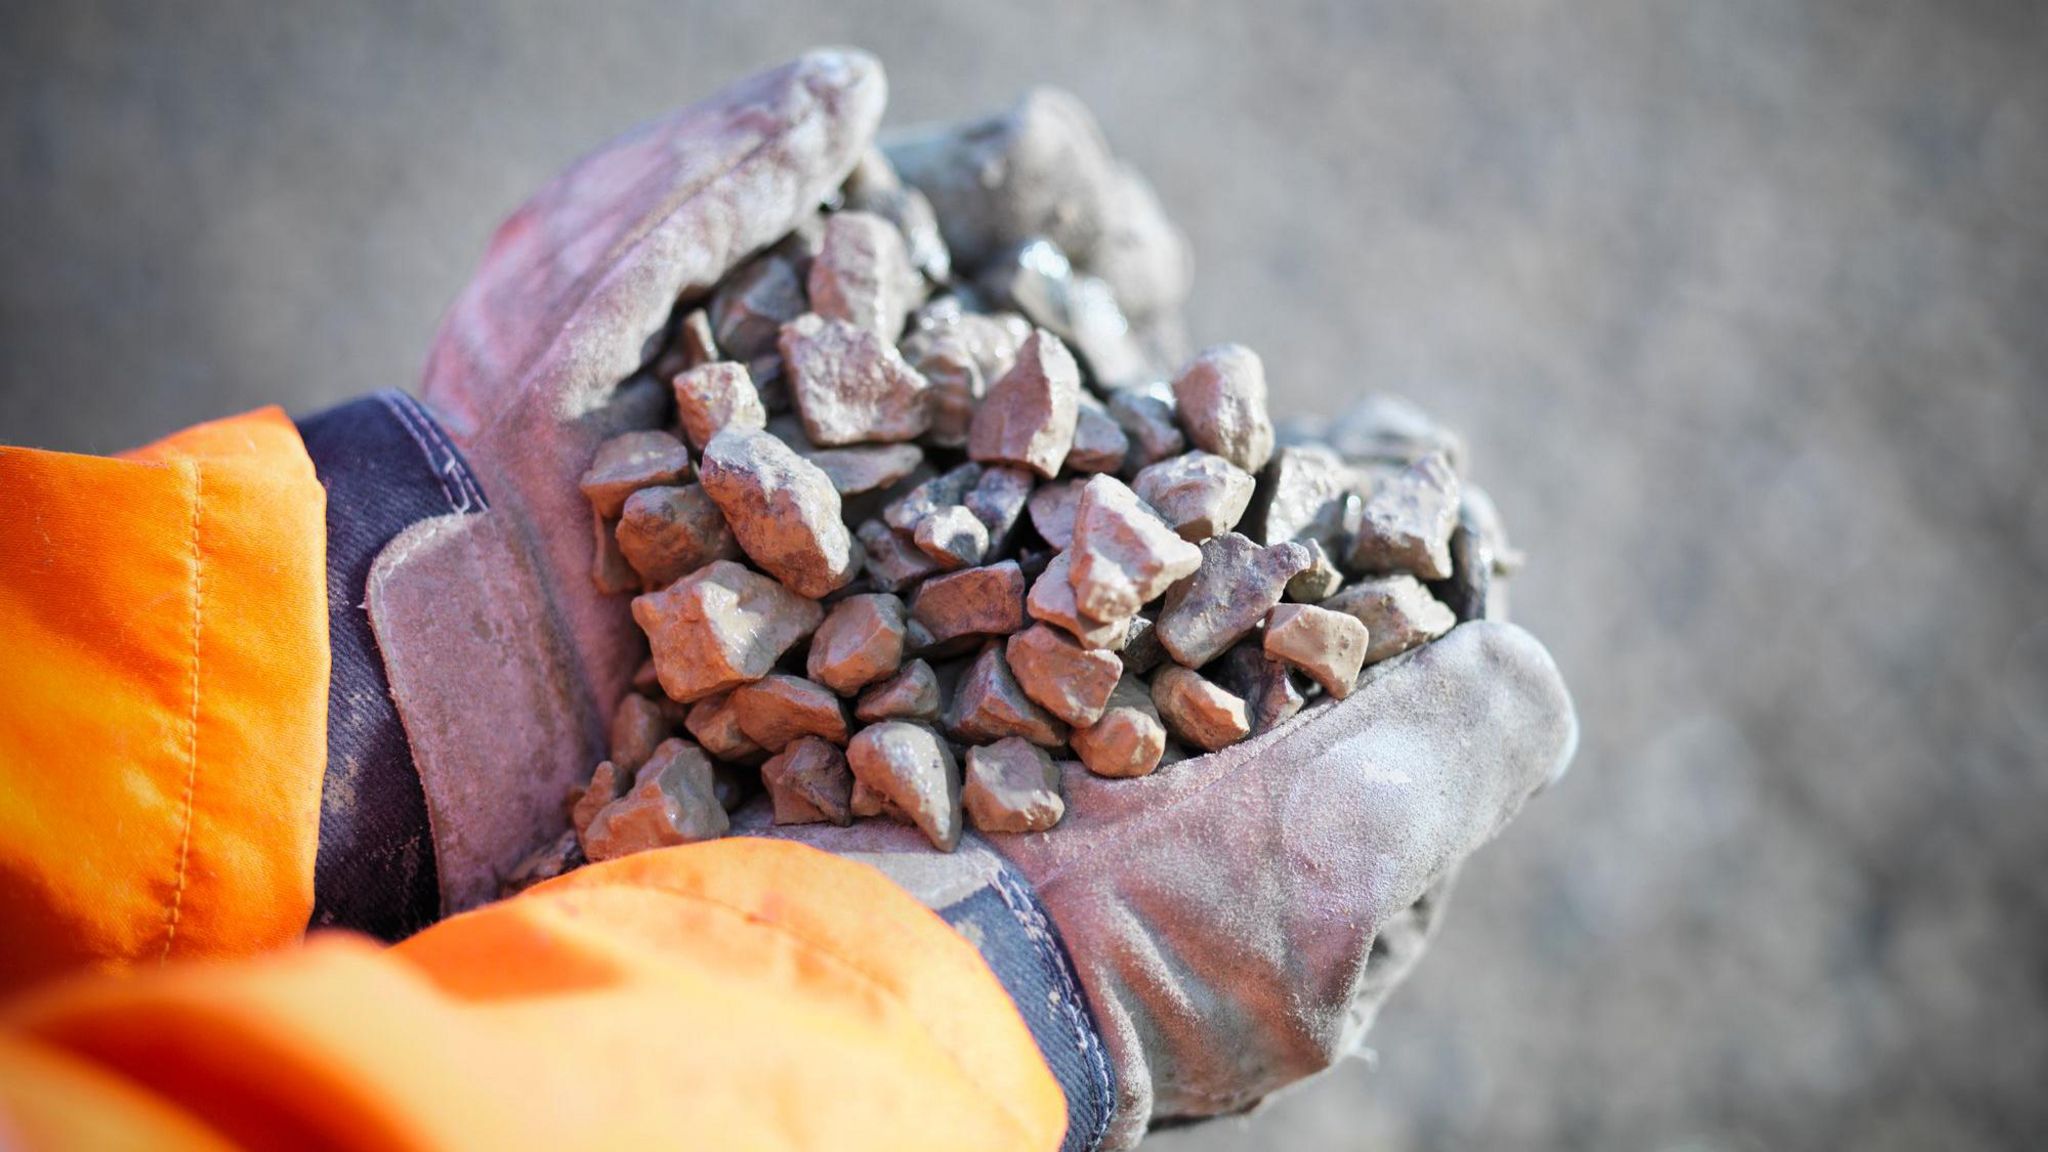 A close up image of a person's hands holding gravel